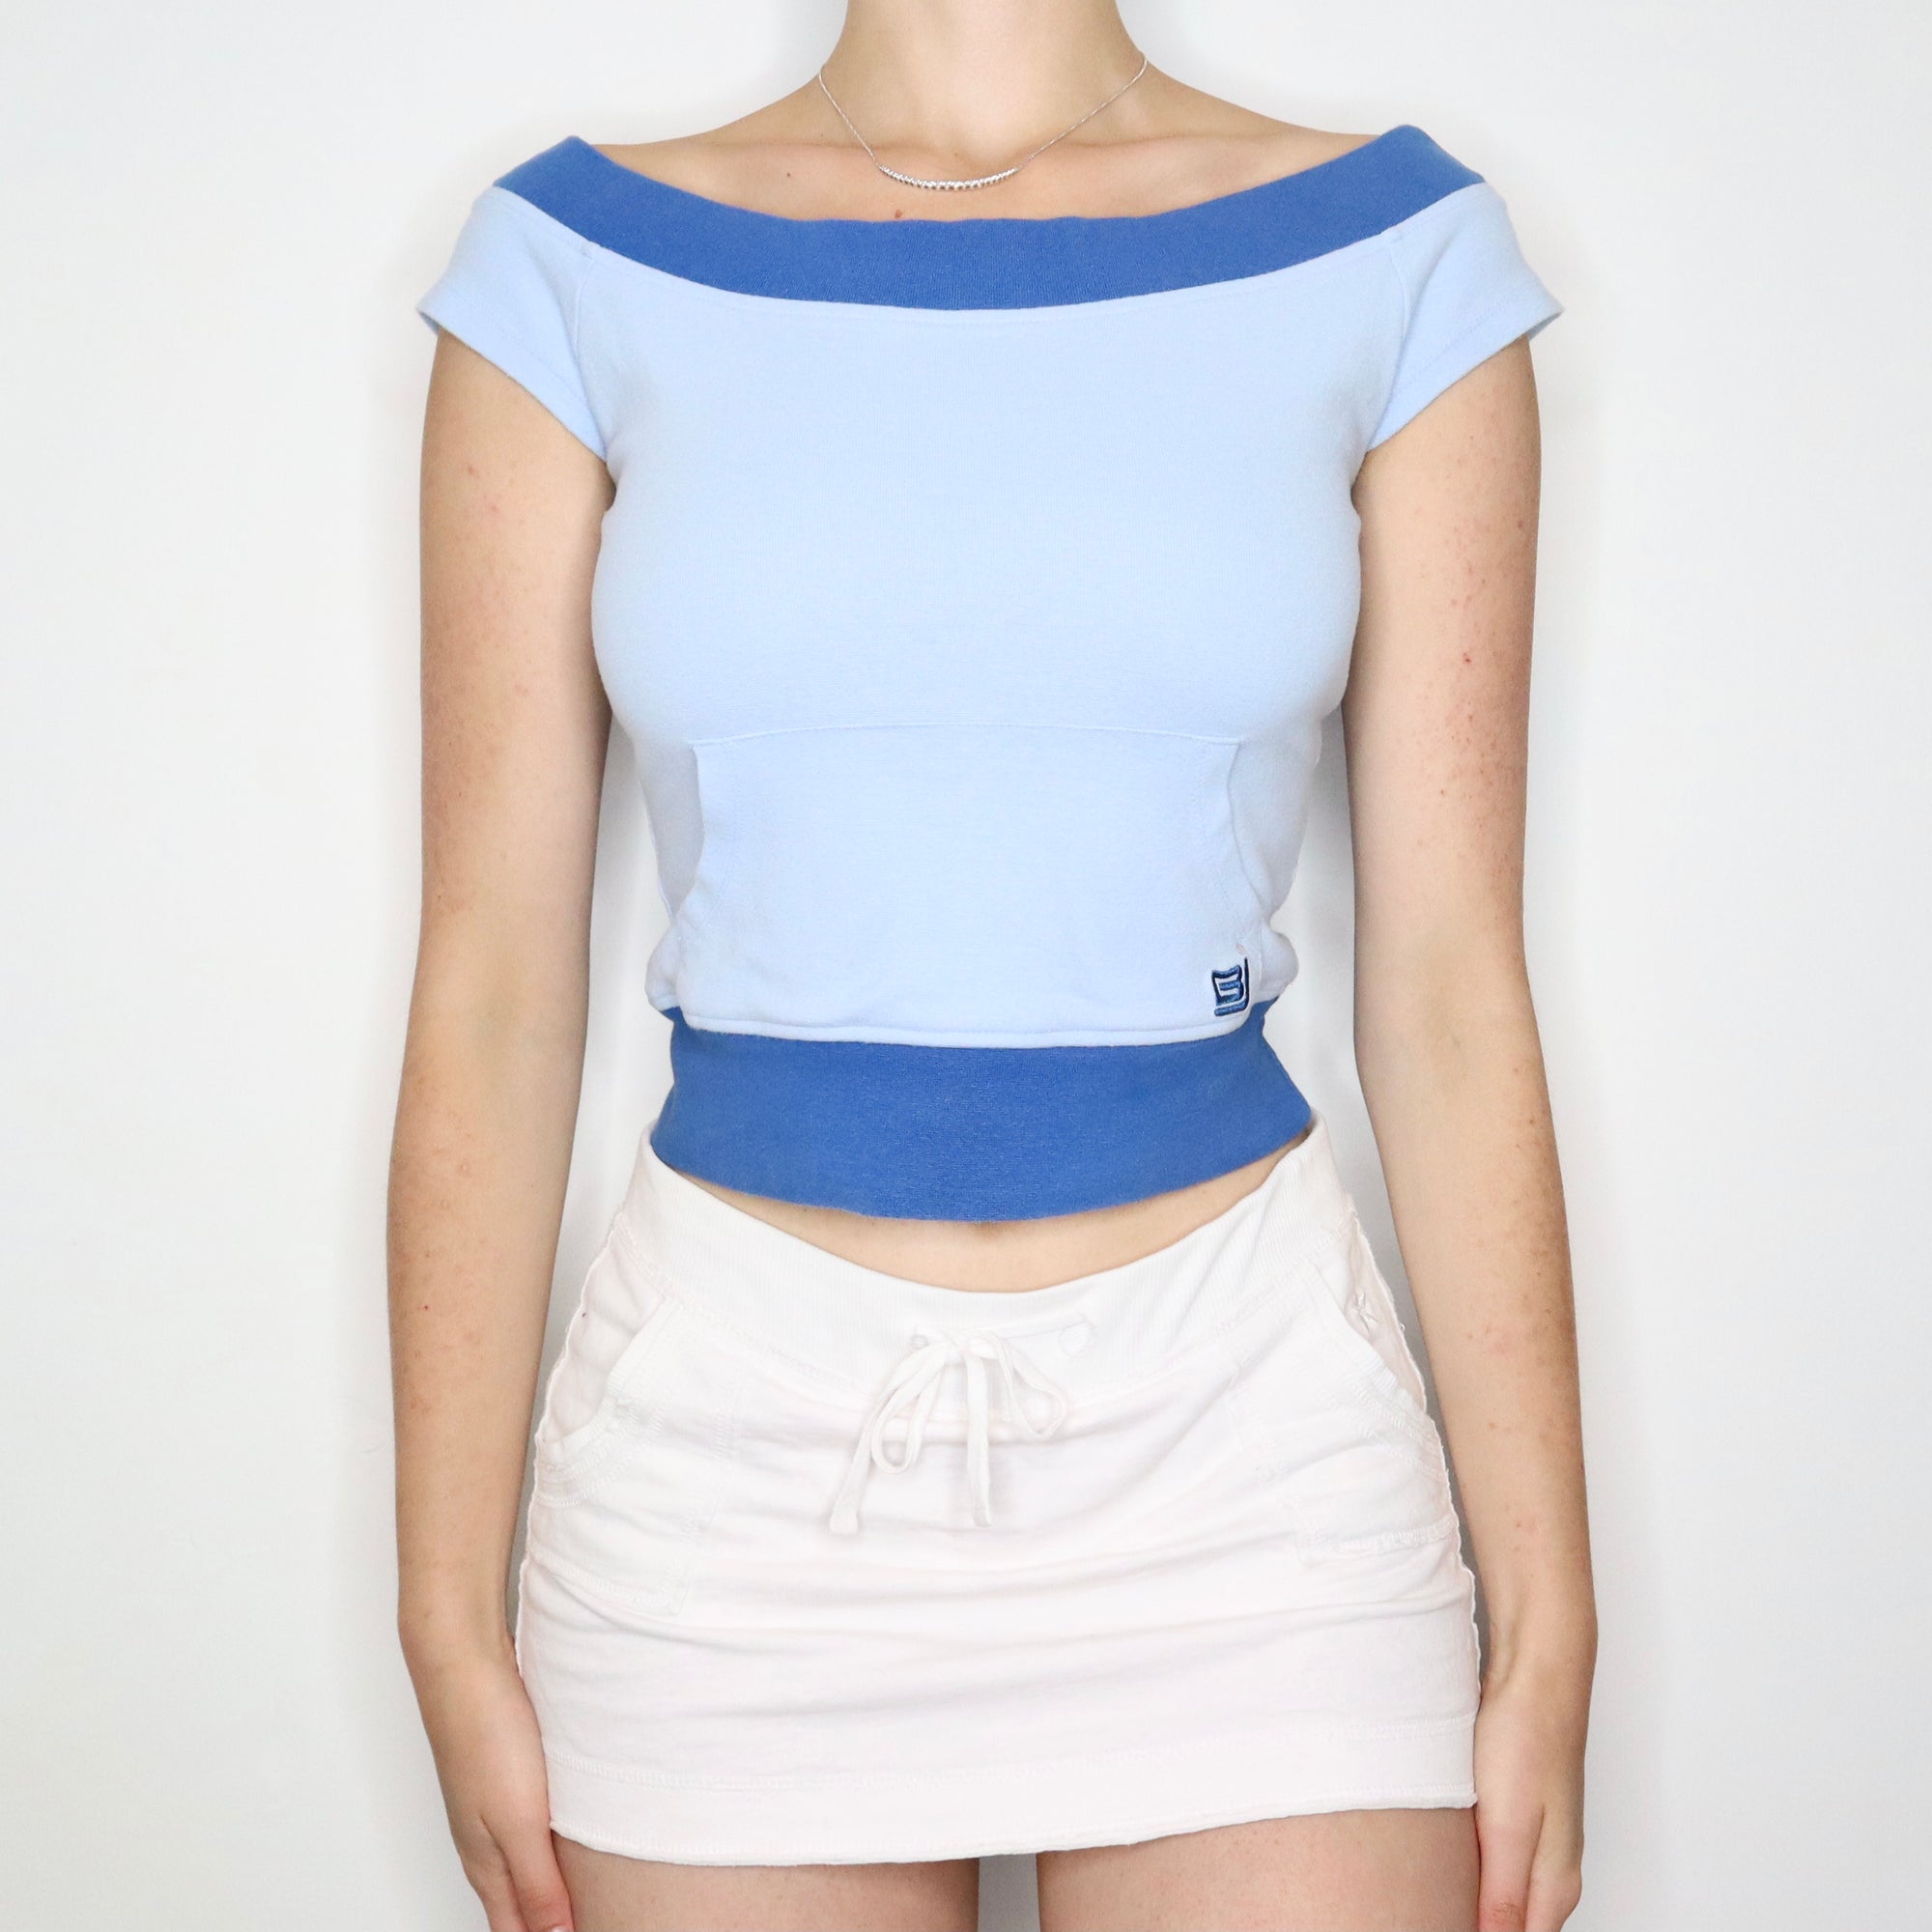 Vintage Early 2000s Bongo Baby Blue Top